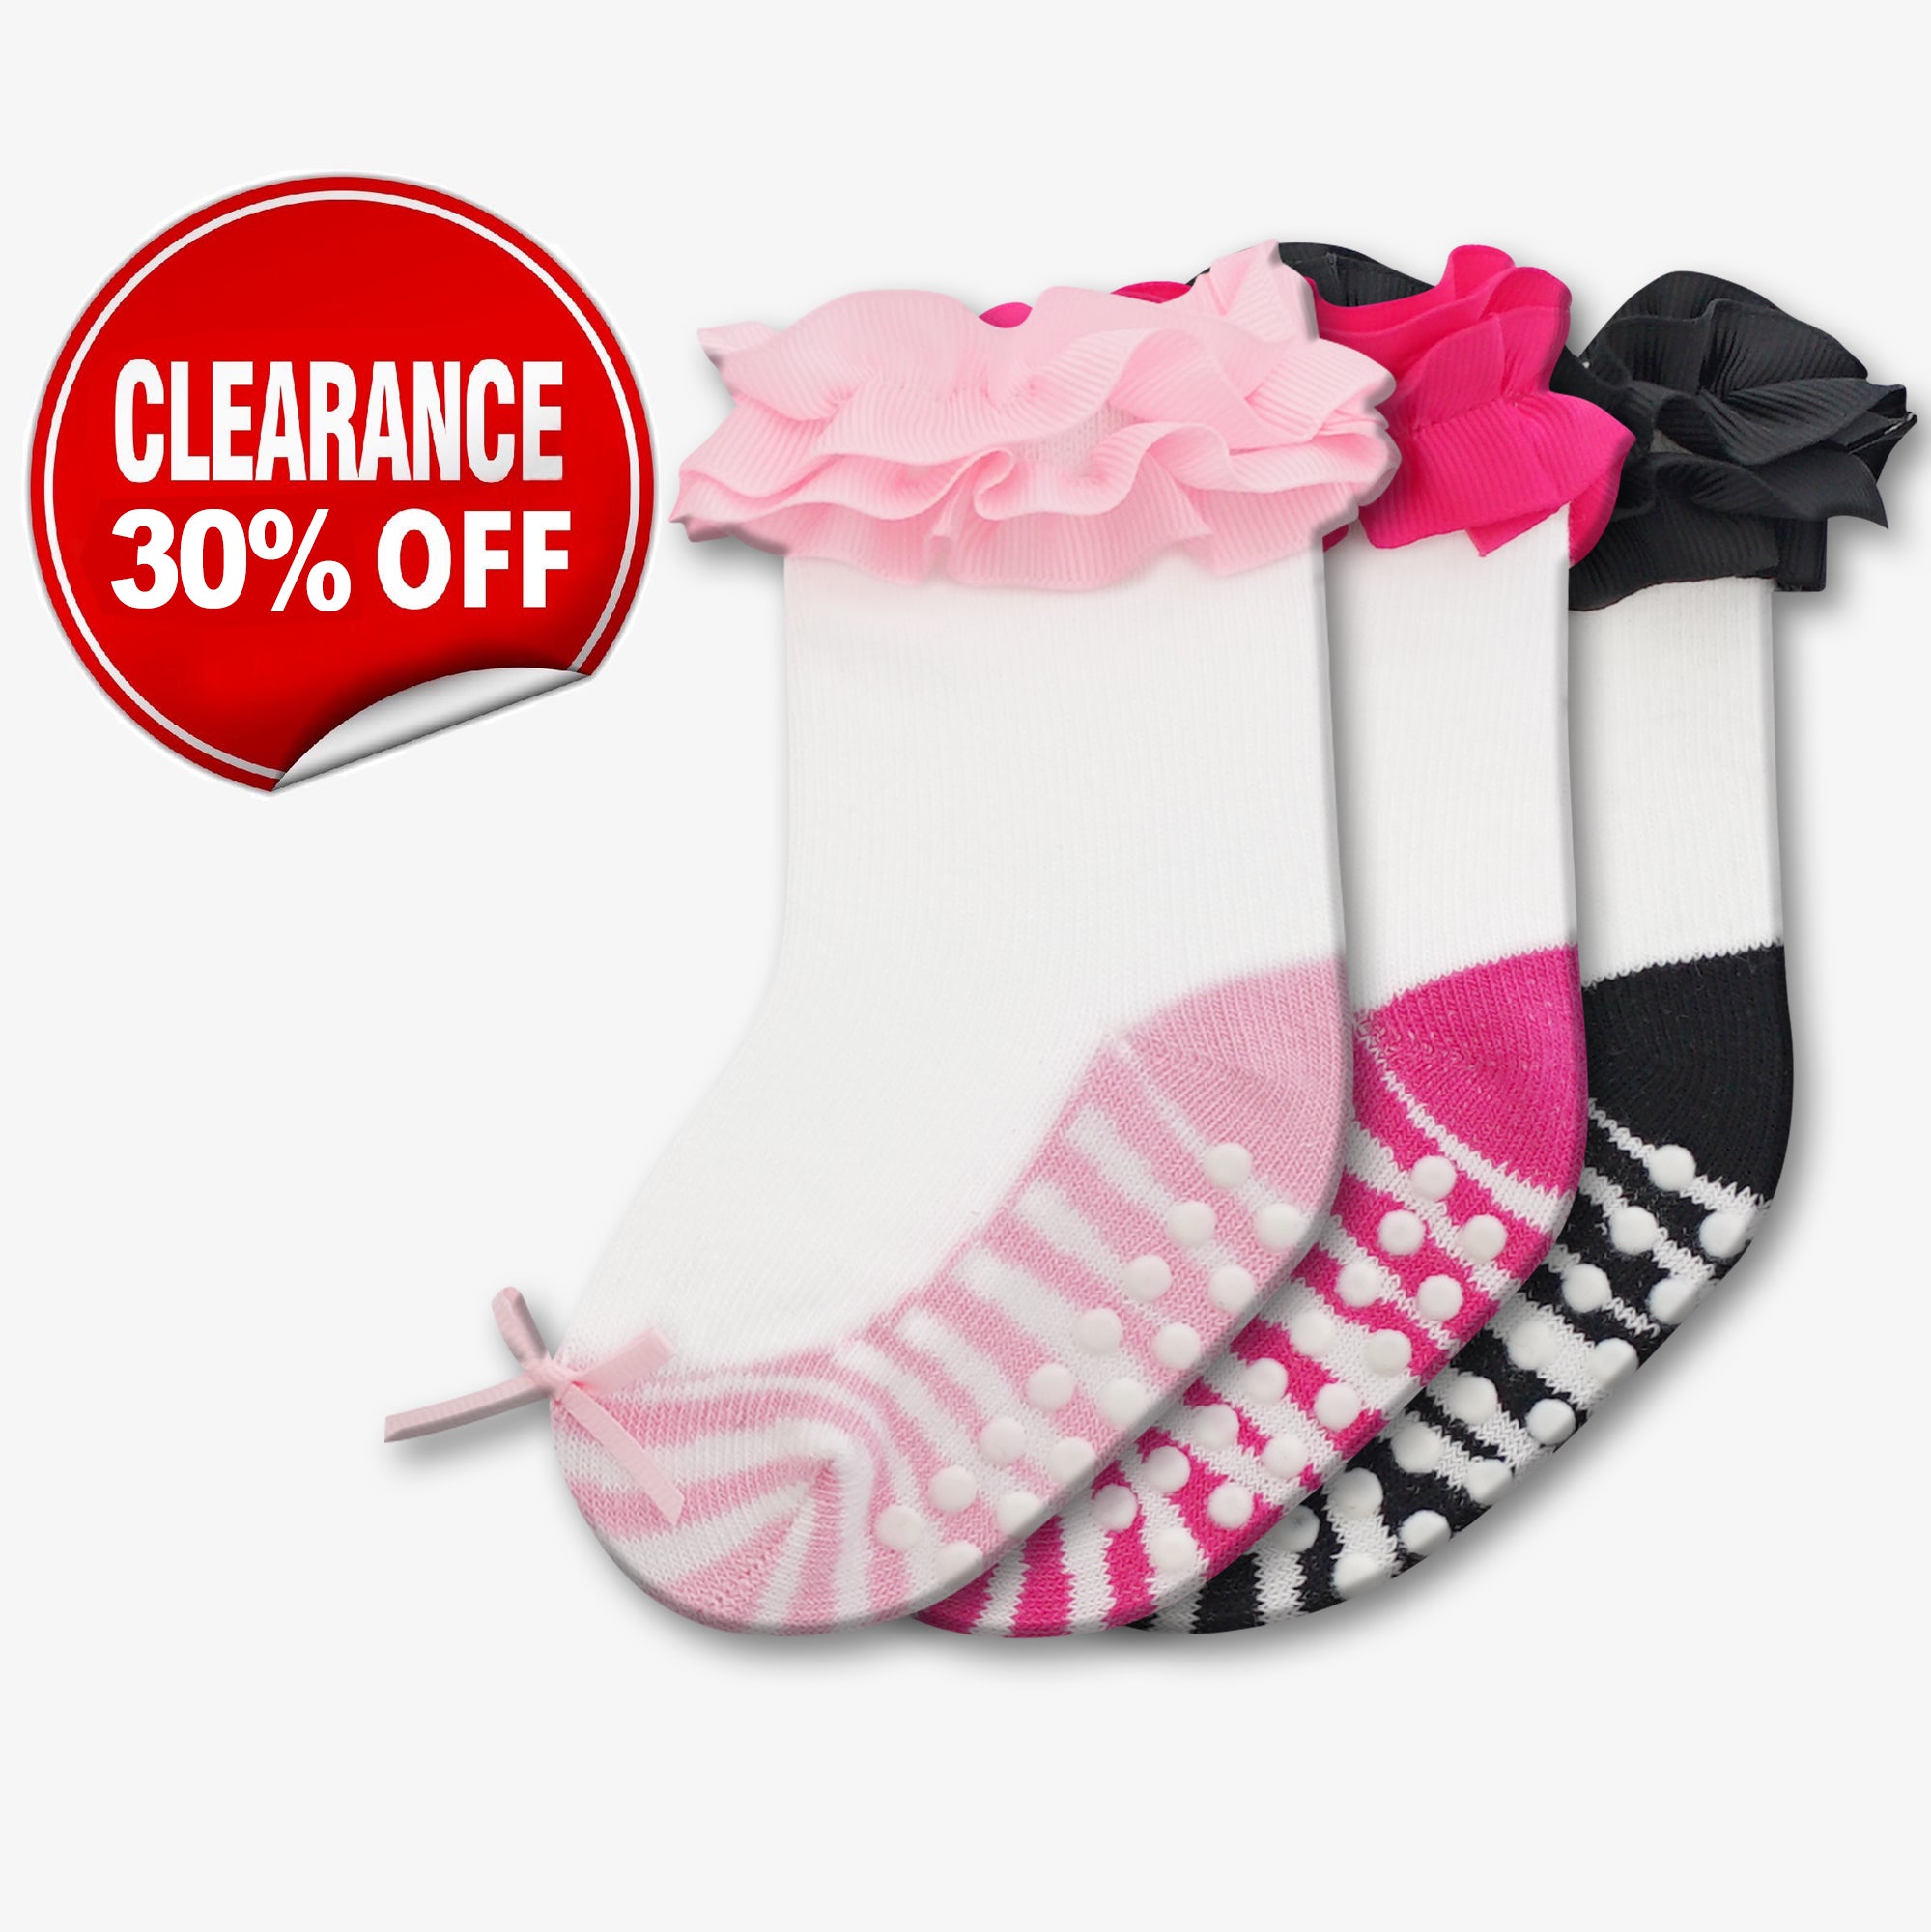 CLEARANCE - Girls Baby Socks - Non Skid - Assorted - Style: 2714